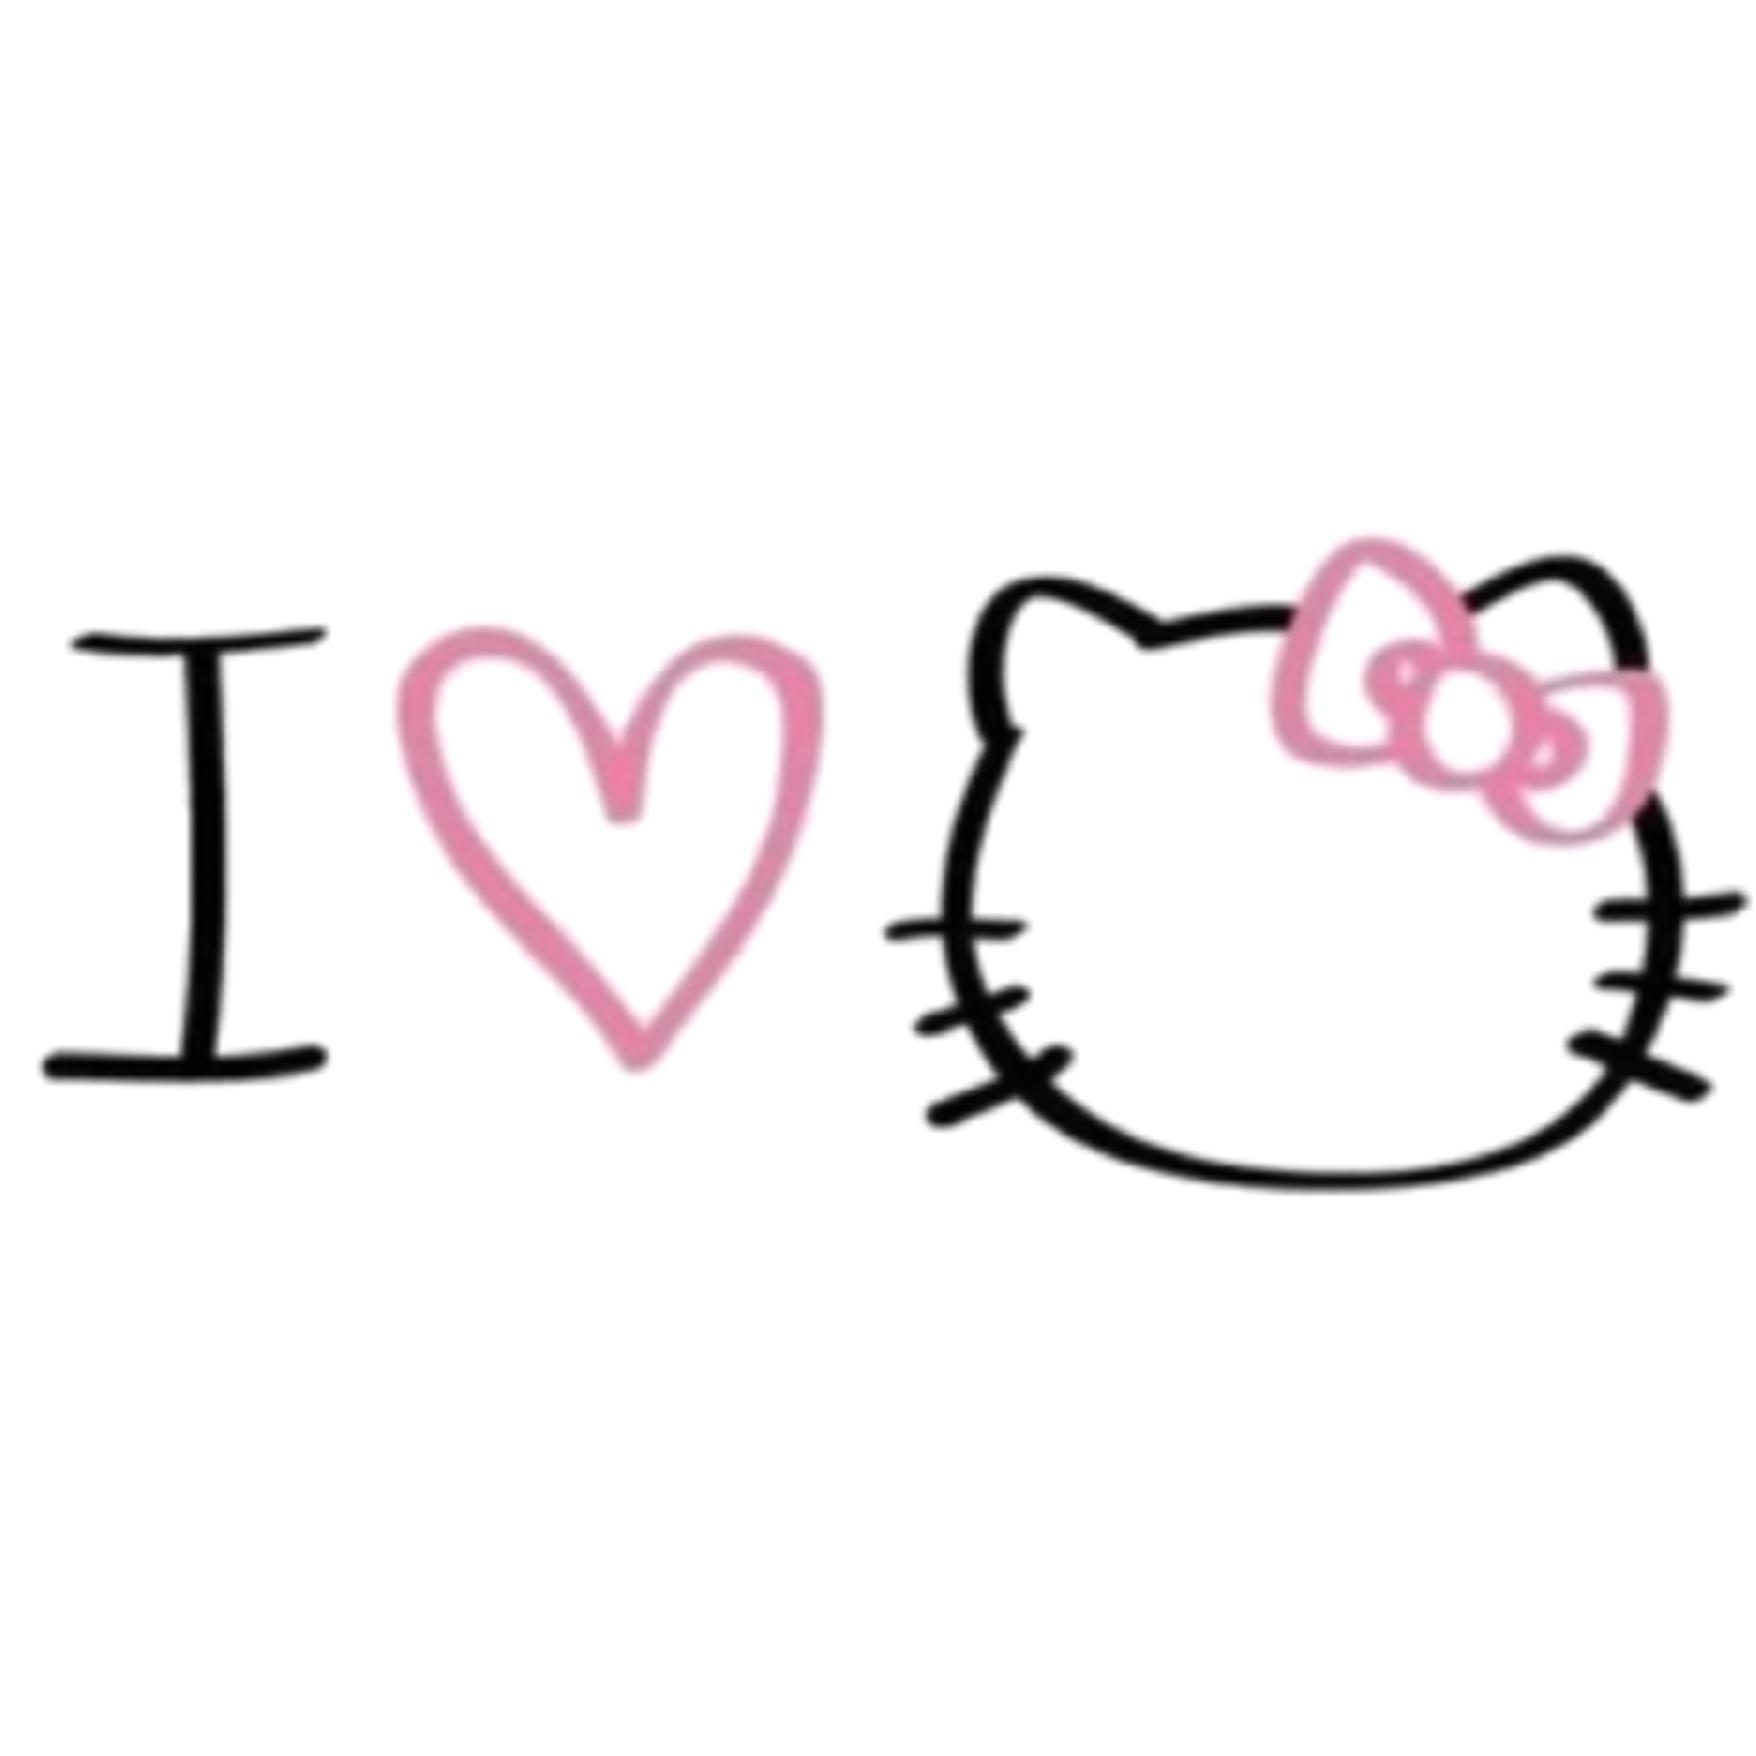 Hello Kitty's images